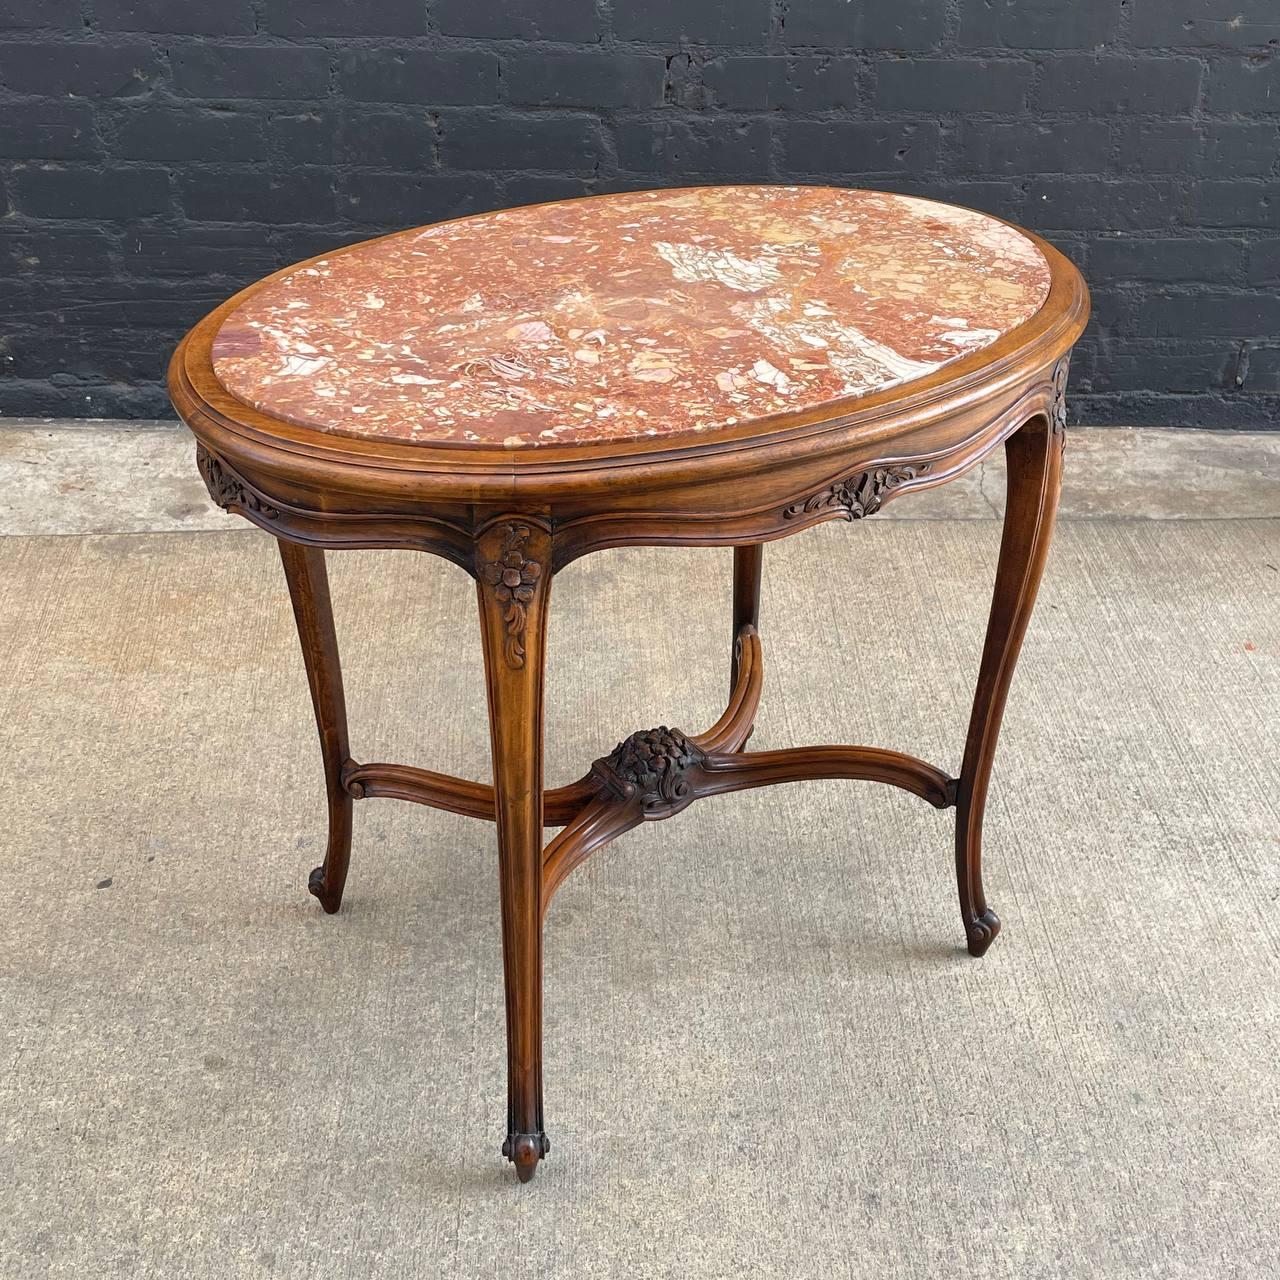 French Louis XV Style Oval Table with Marble Top

Country: France
Materials: Carved Wood, Original Marble Stone
Condition: Original Condition
Style: French Antique
Year: 1950’s

$1,895

Dimensions 
30”H x 36”W x 25”D.